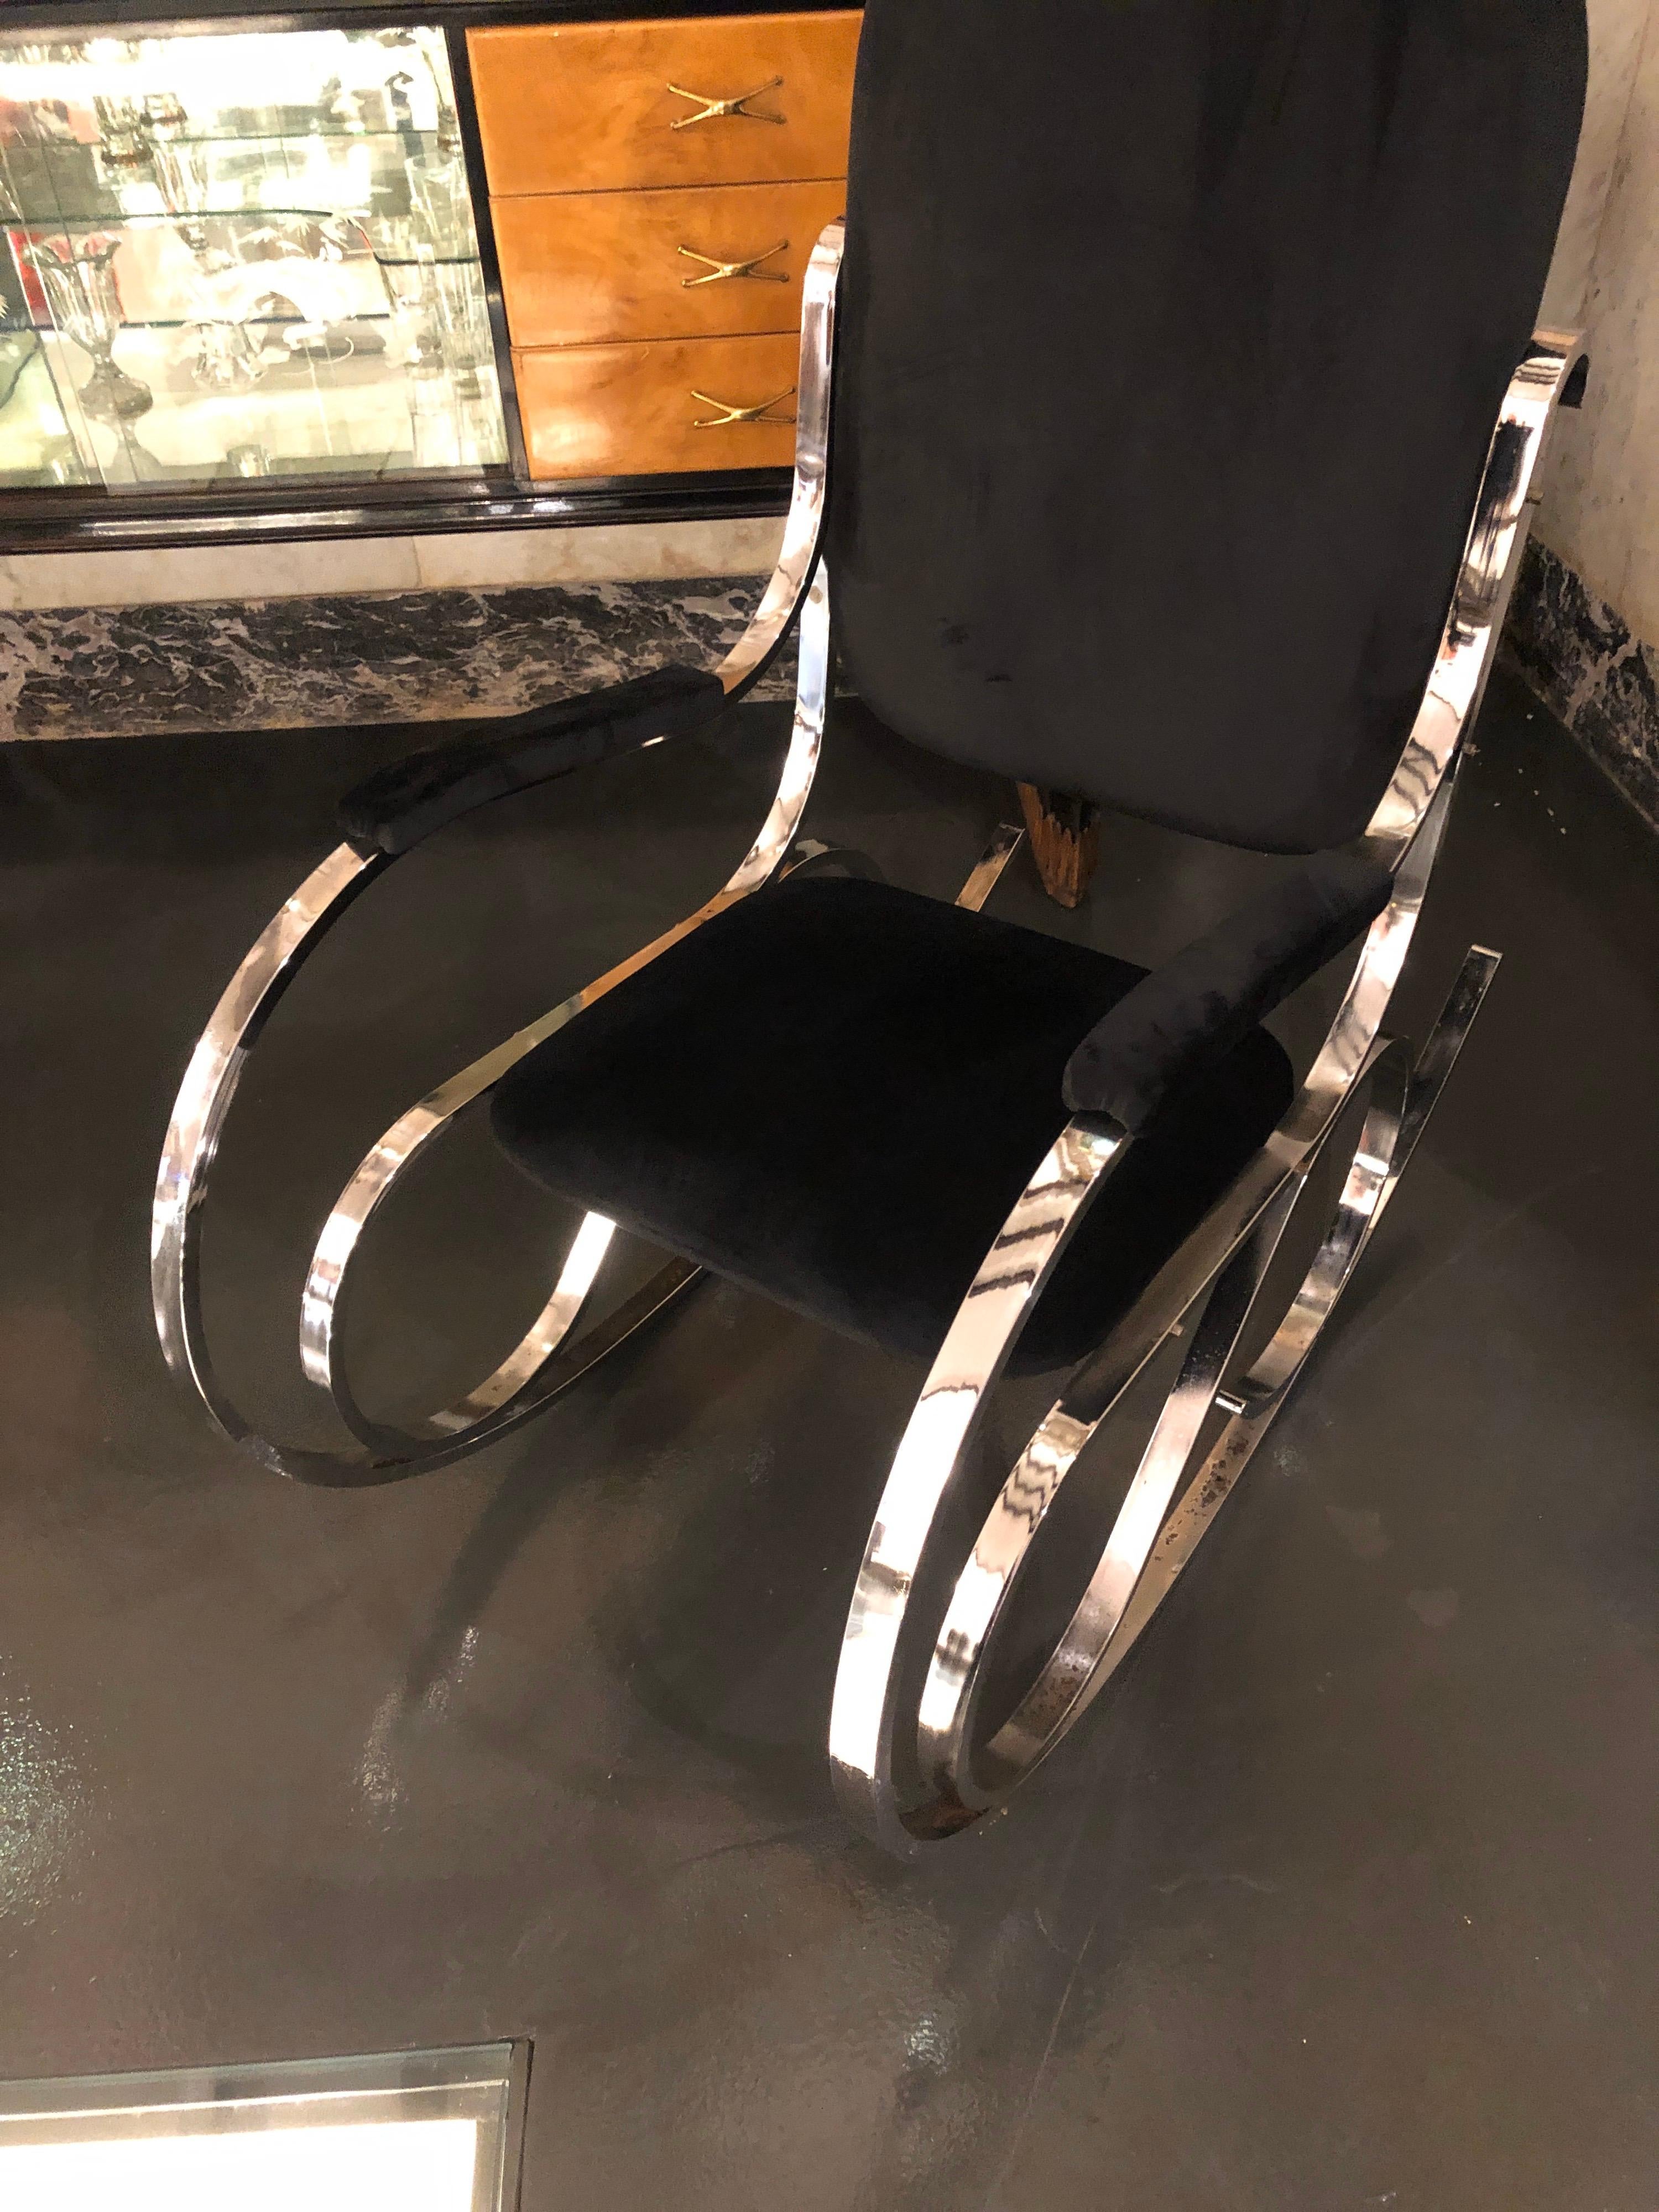 An Italian rocking chair made in the 1970s, good conditions overall, it has been upholstered with a goergeous black velvet. The is a stylish and contemporary take on the classic rocking chair design. It combines the sleekness of chromed steel with